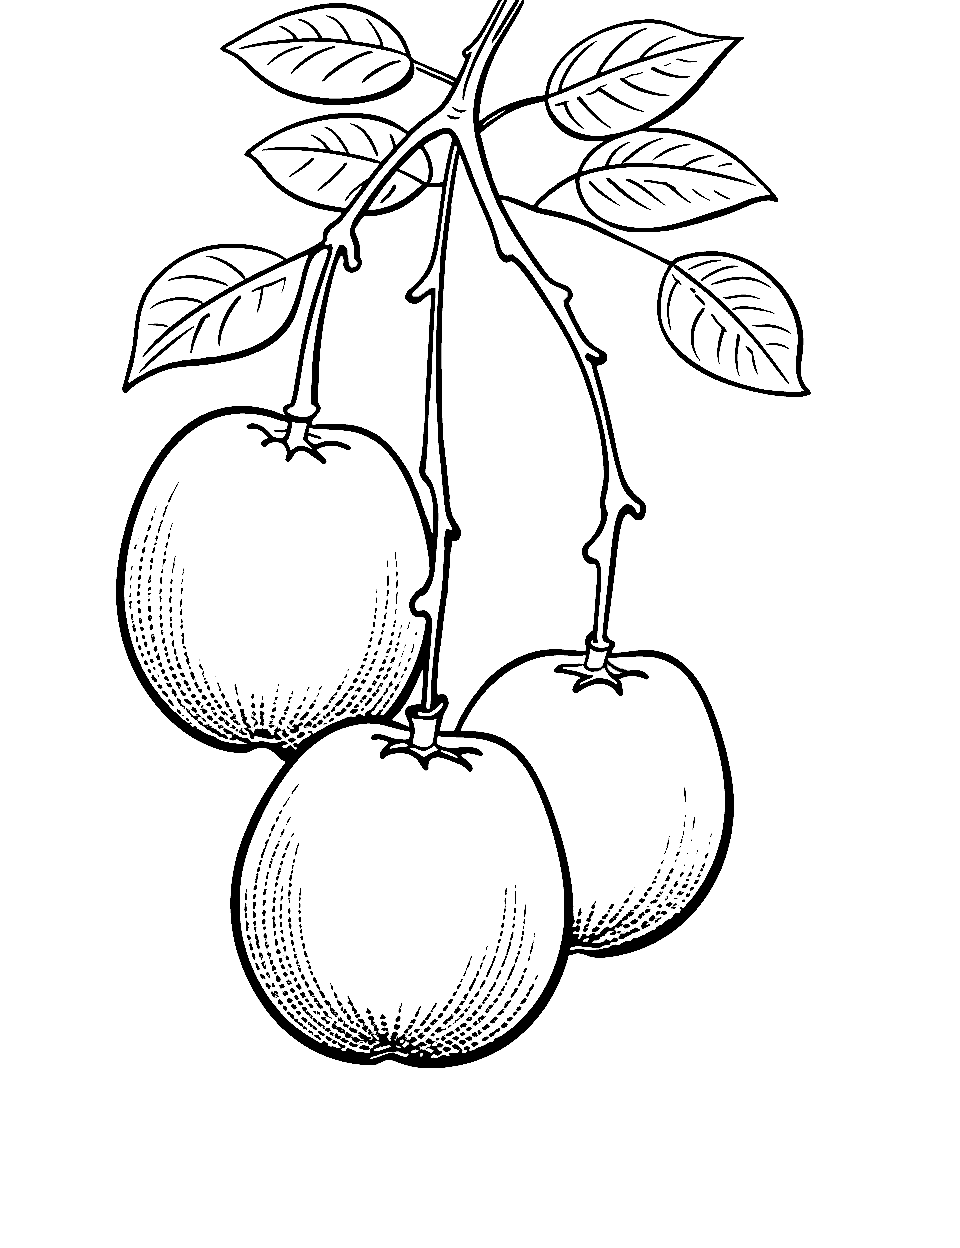 Passion Fruit Paradise Coloring Page - Passion fruits hanging from a vine.